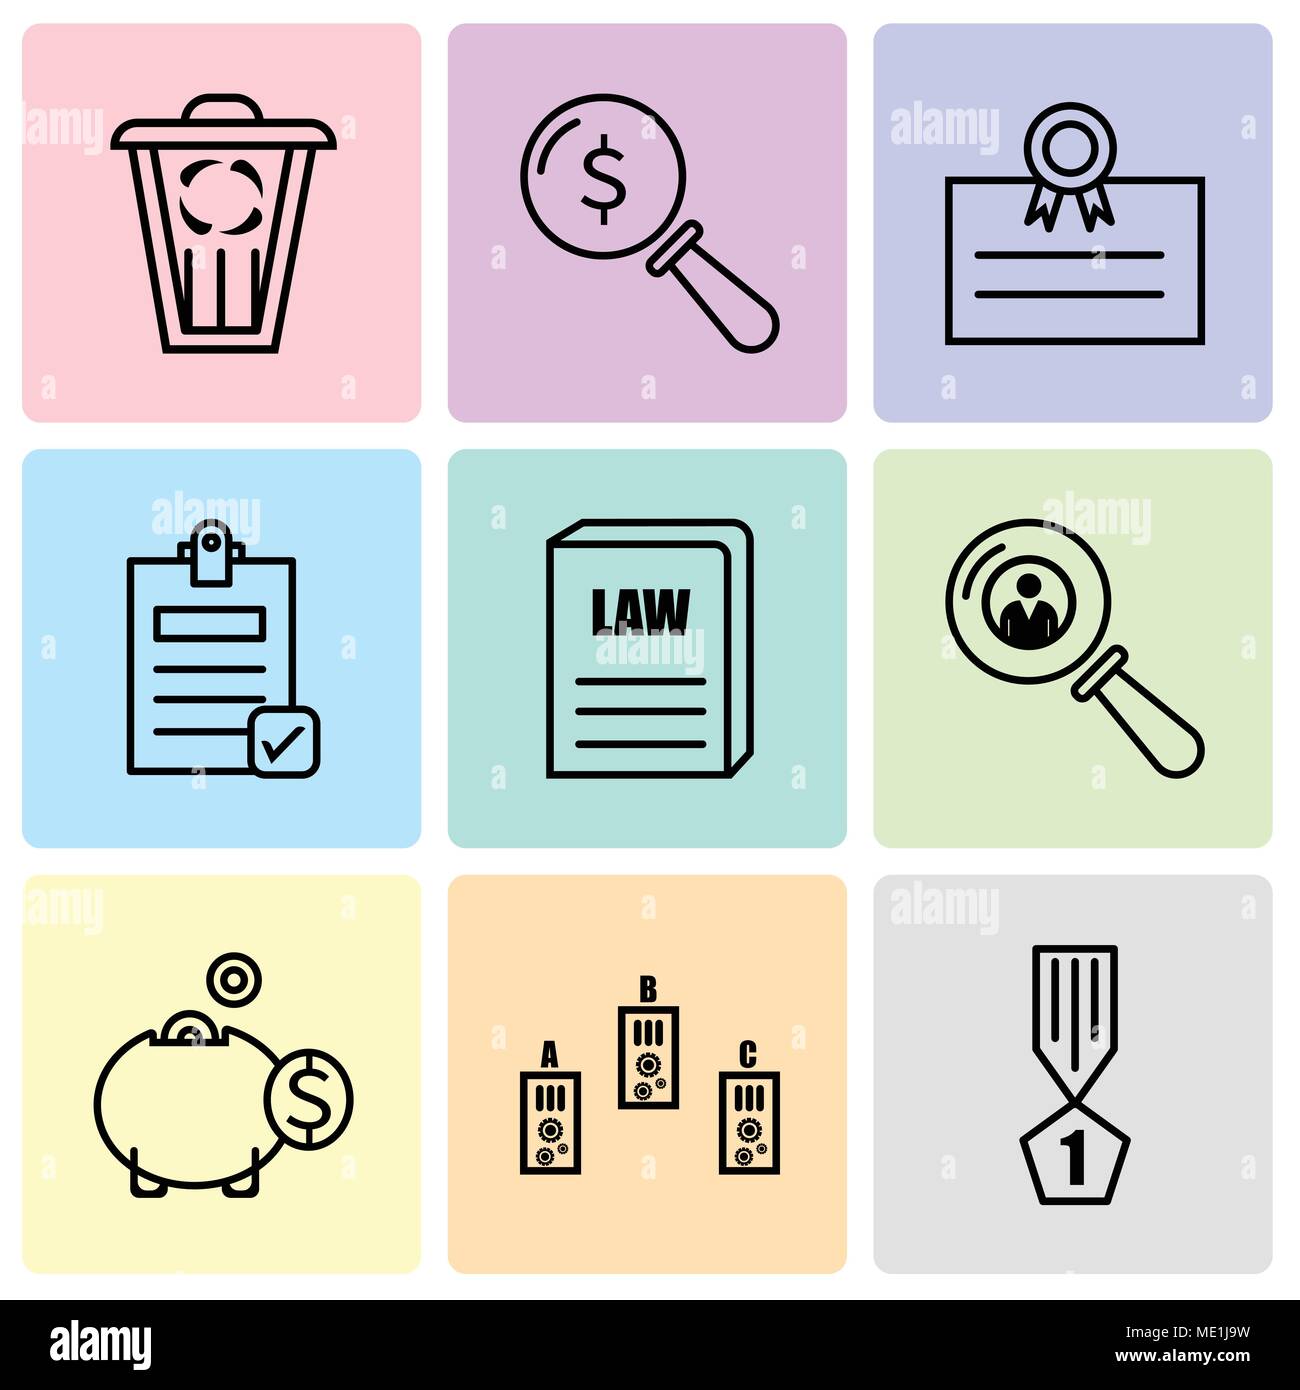 Set Of 9 simple editable icons such as winner, folder, money box, search person, law book, Check document, postcard, lens, trash, can be used for mobi Stock Vector